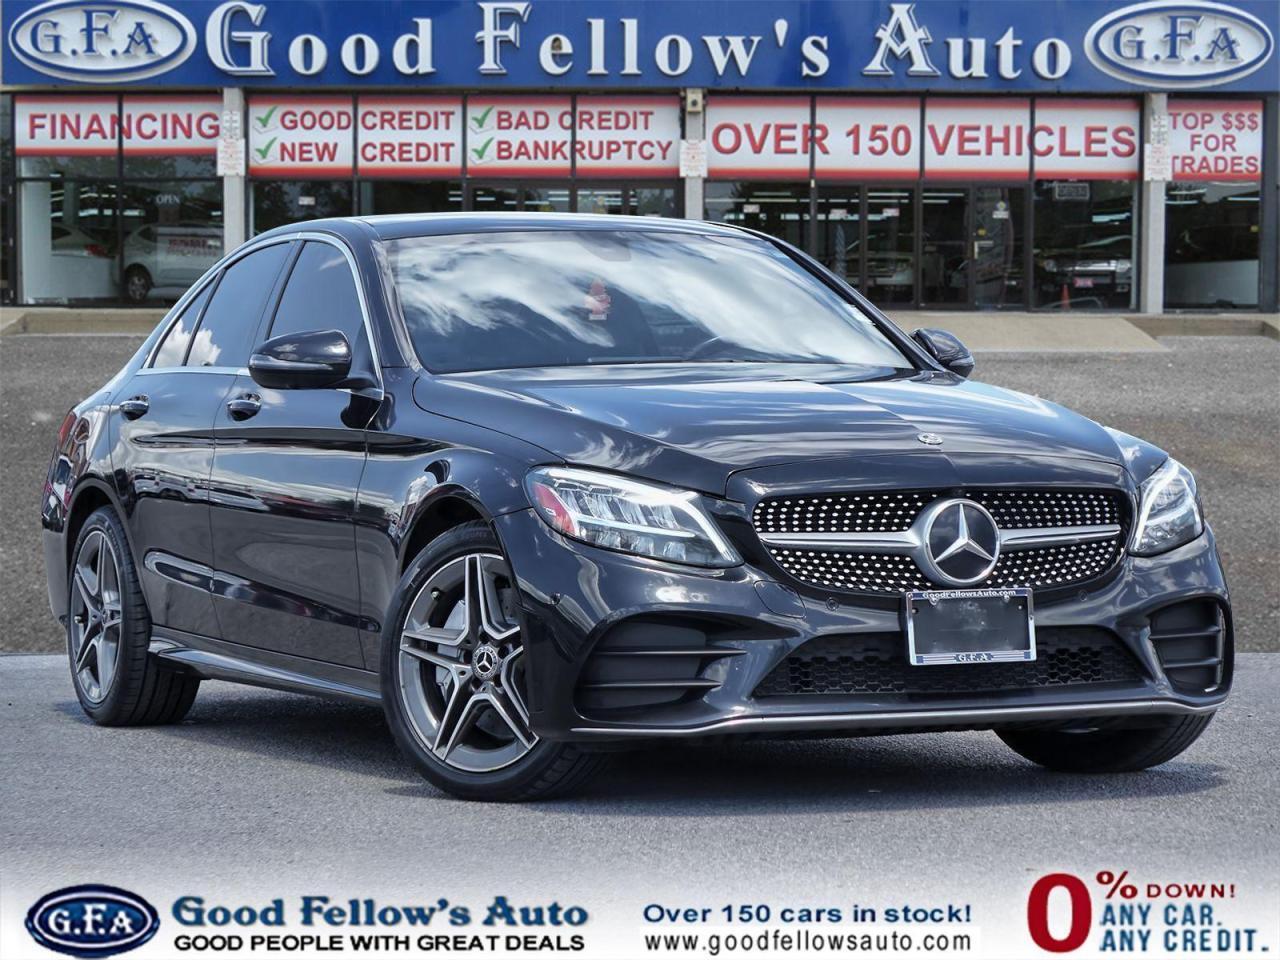 2019 Mercedes-Benz C-Class 4MATIC, AMG PACKAGE, LEATHER SEATS, PANORAMIC ROOF